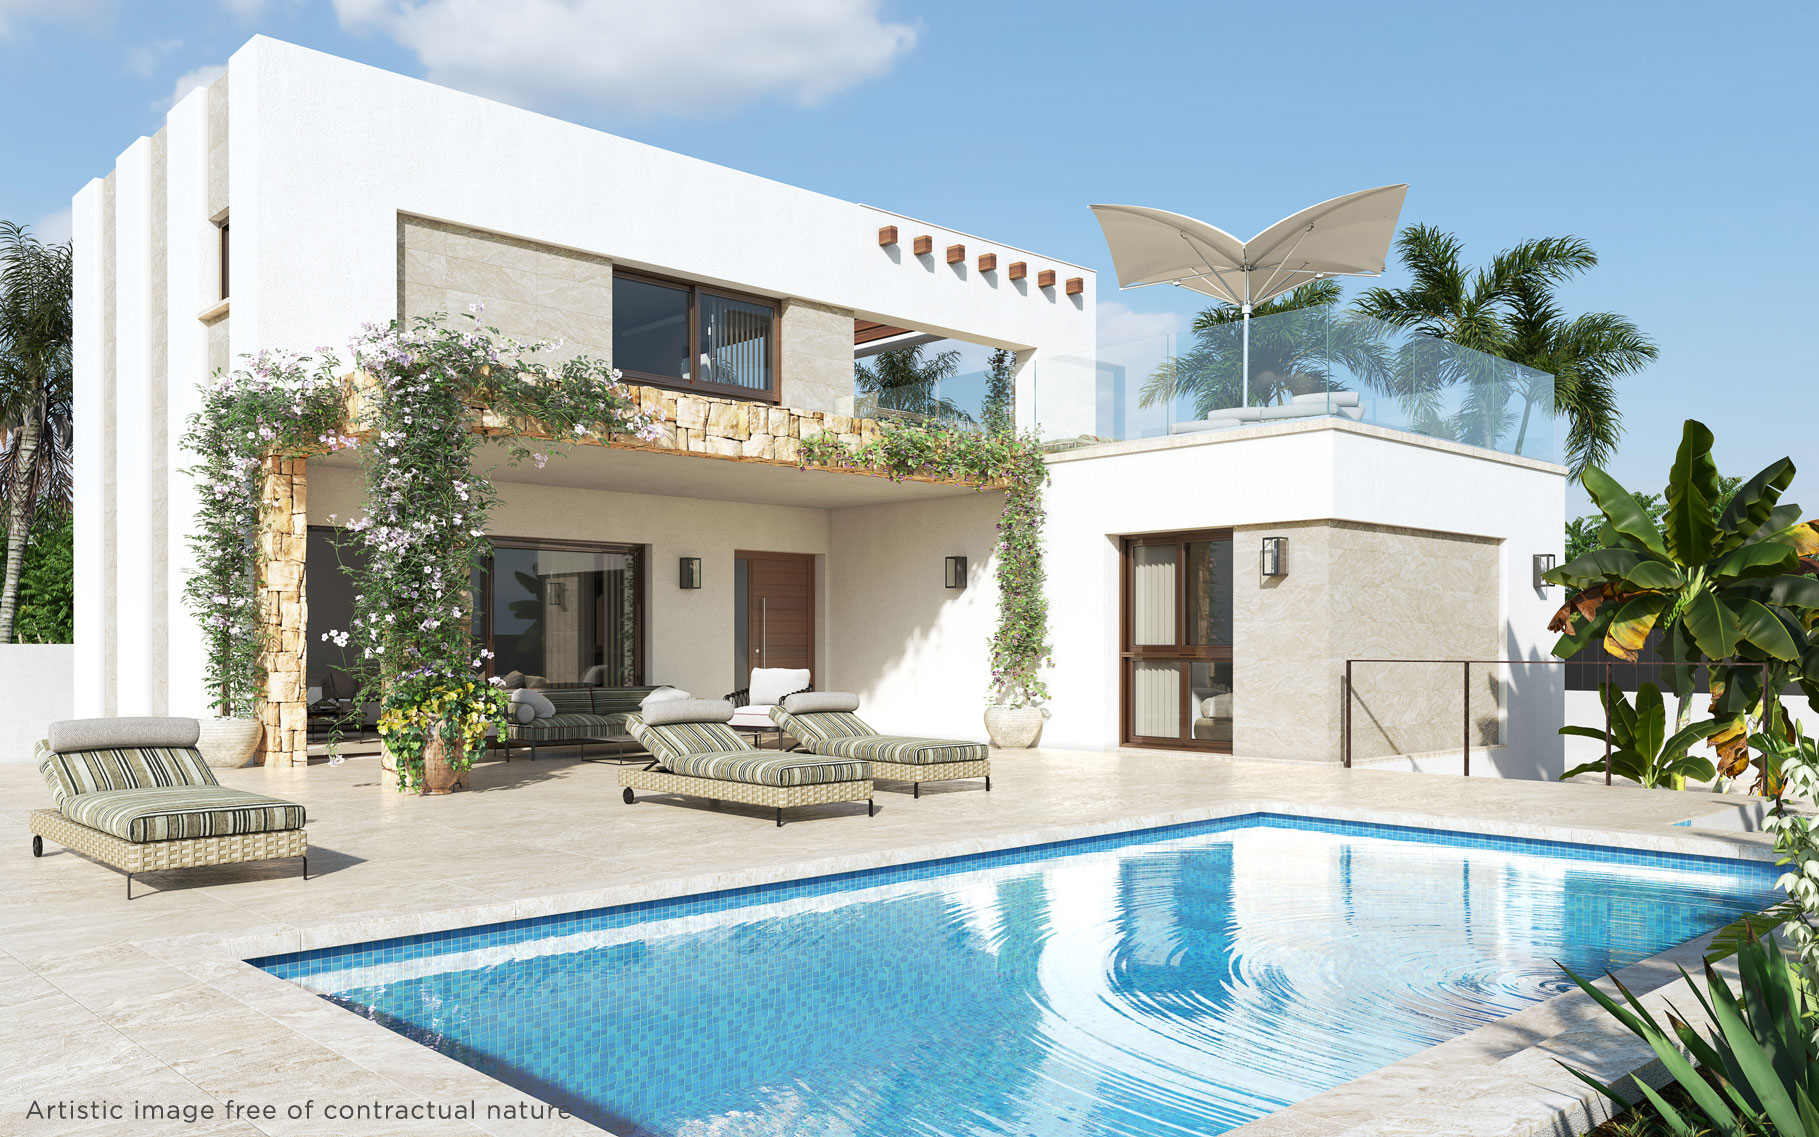 Luxurious Fully-Furnished New 3 Bed Villa on Spacious Plot